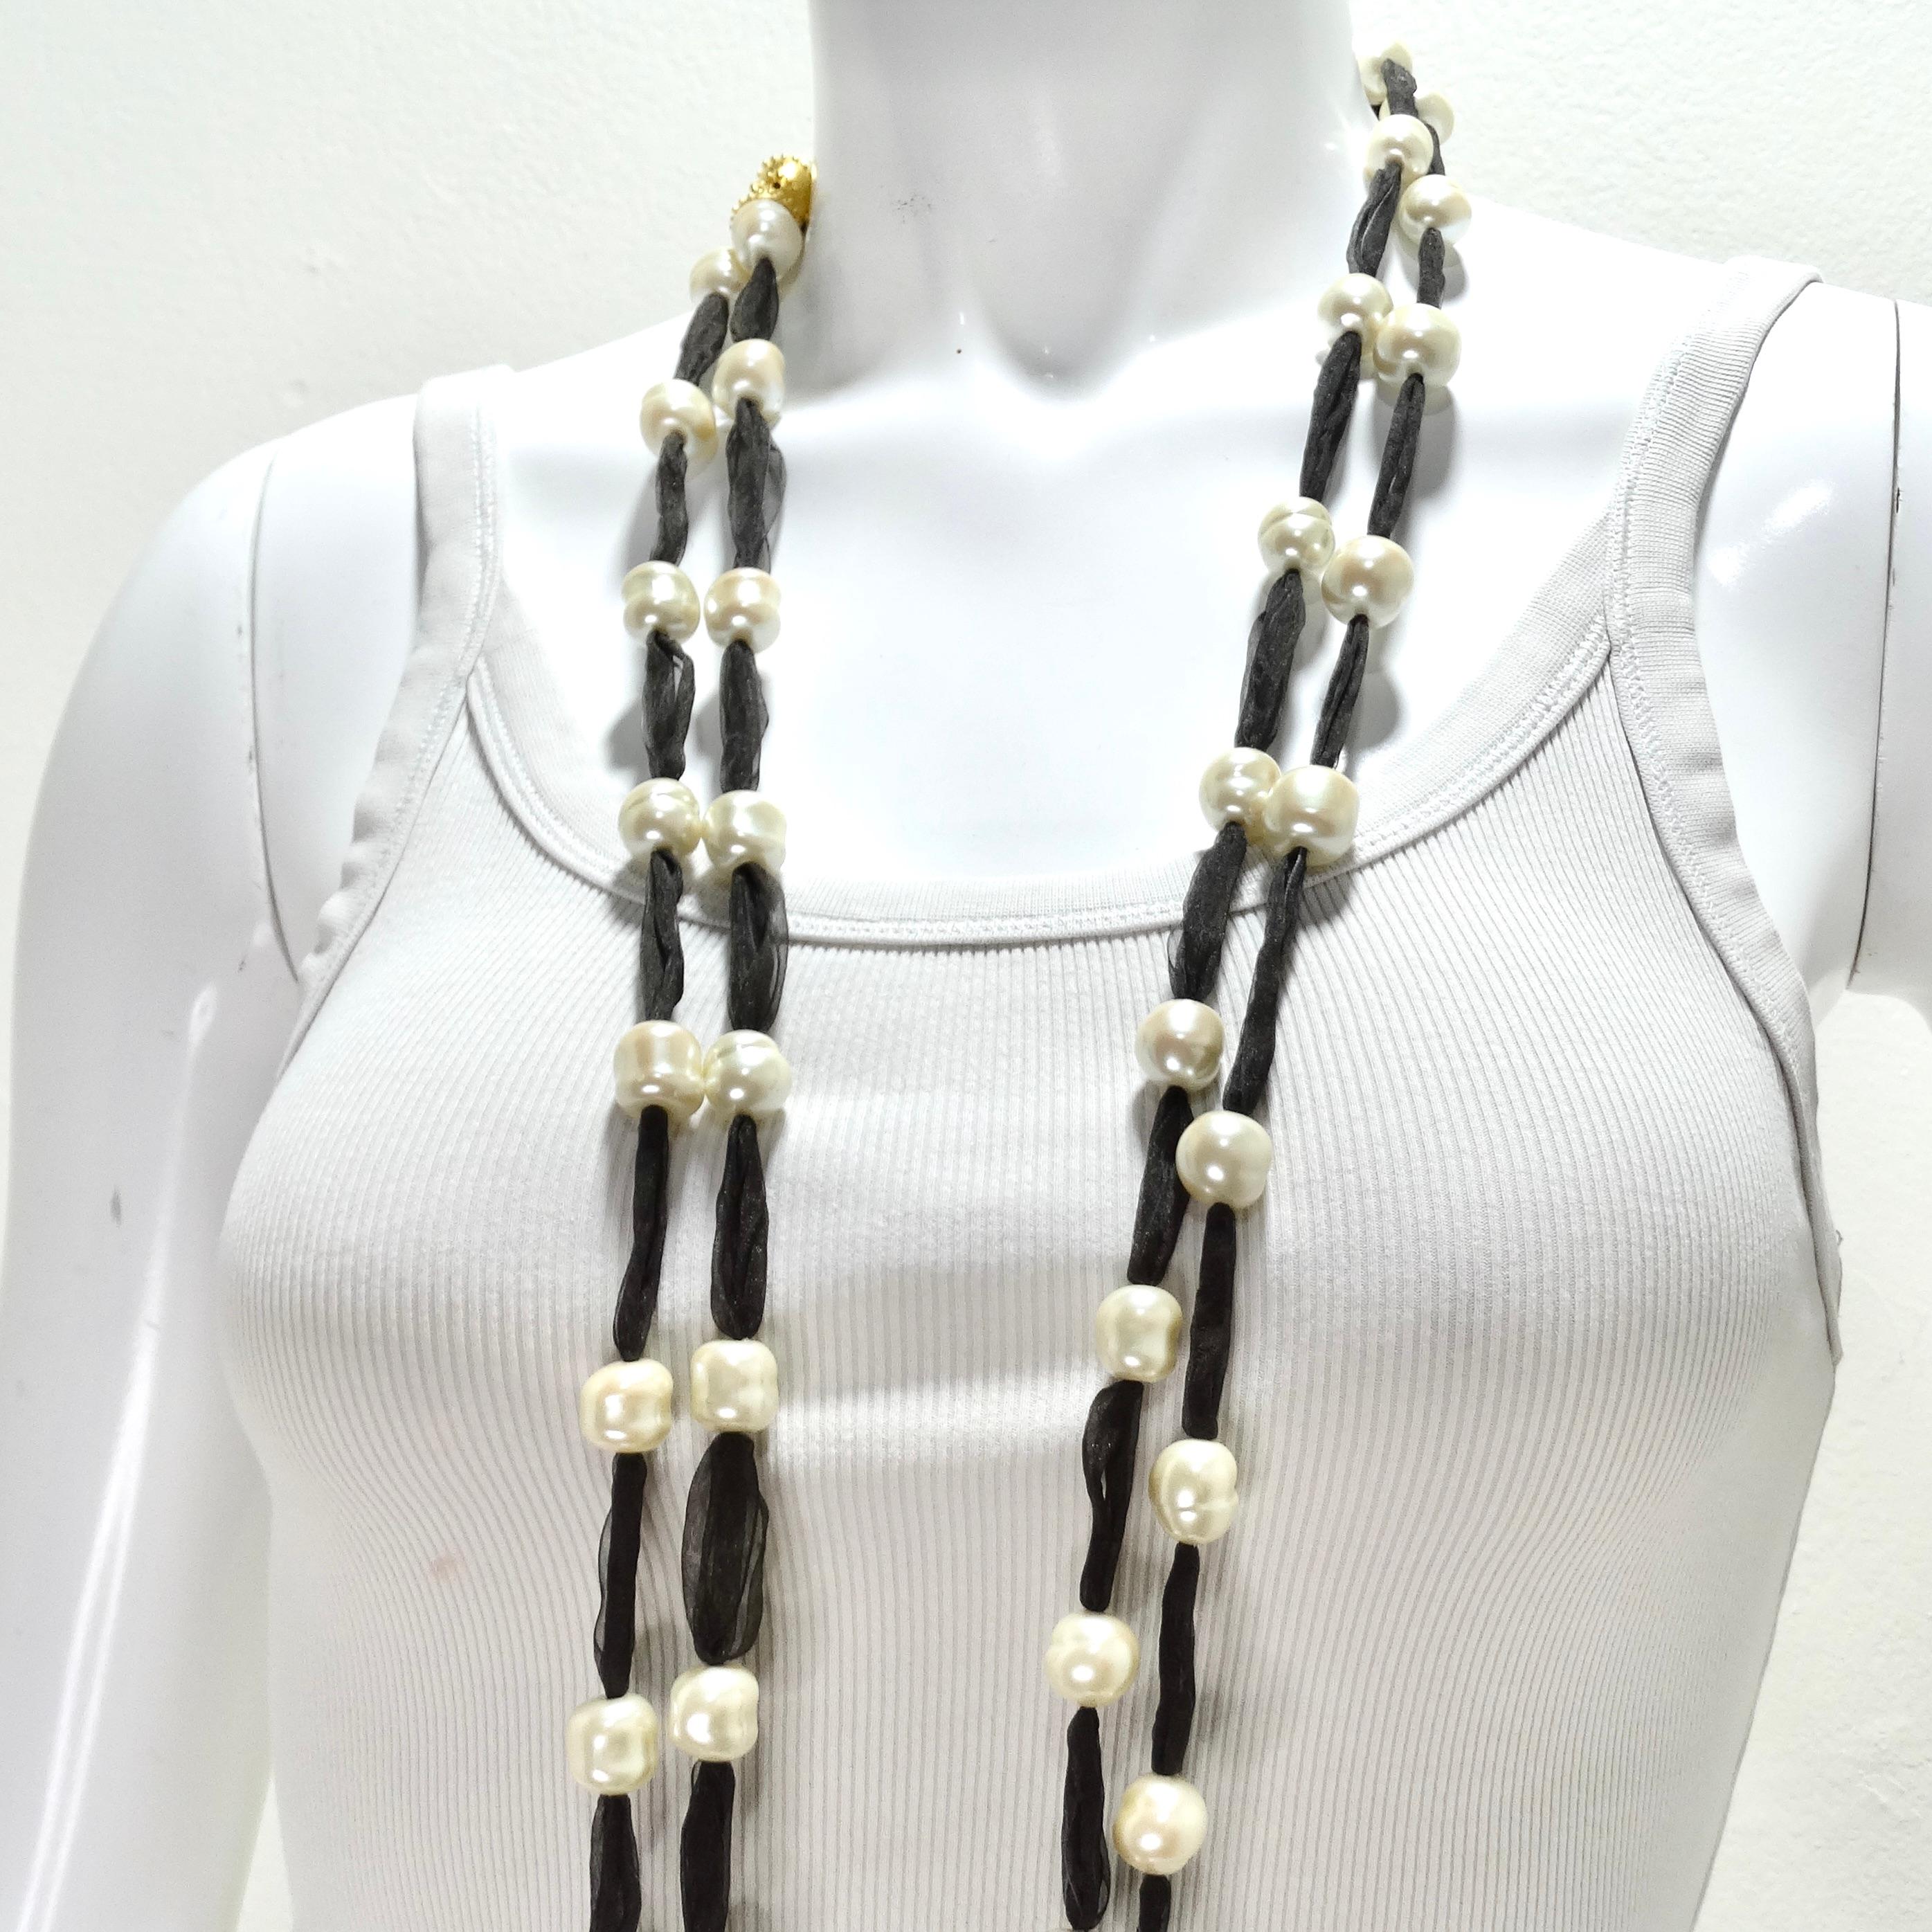 Upgrade your style with the Jaded Jewels Set of 2 Long Freshwater Pearl Ribbon Necklaces, a pair of stunning and versatile necklaces that combine the timeless beauty of freshwater pearls with a dark brown sheer ribbon. The combination of freshwater